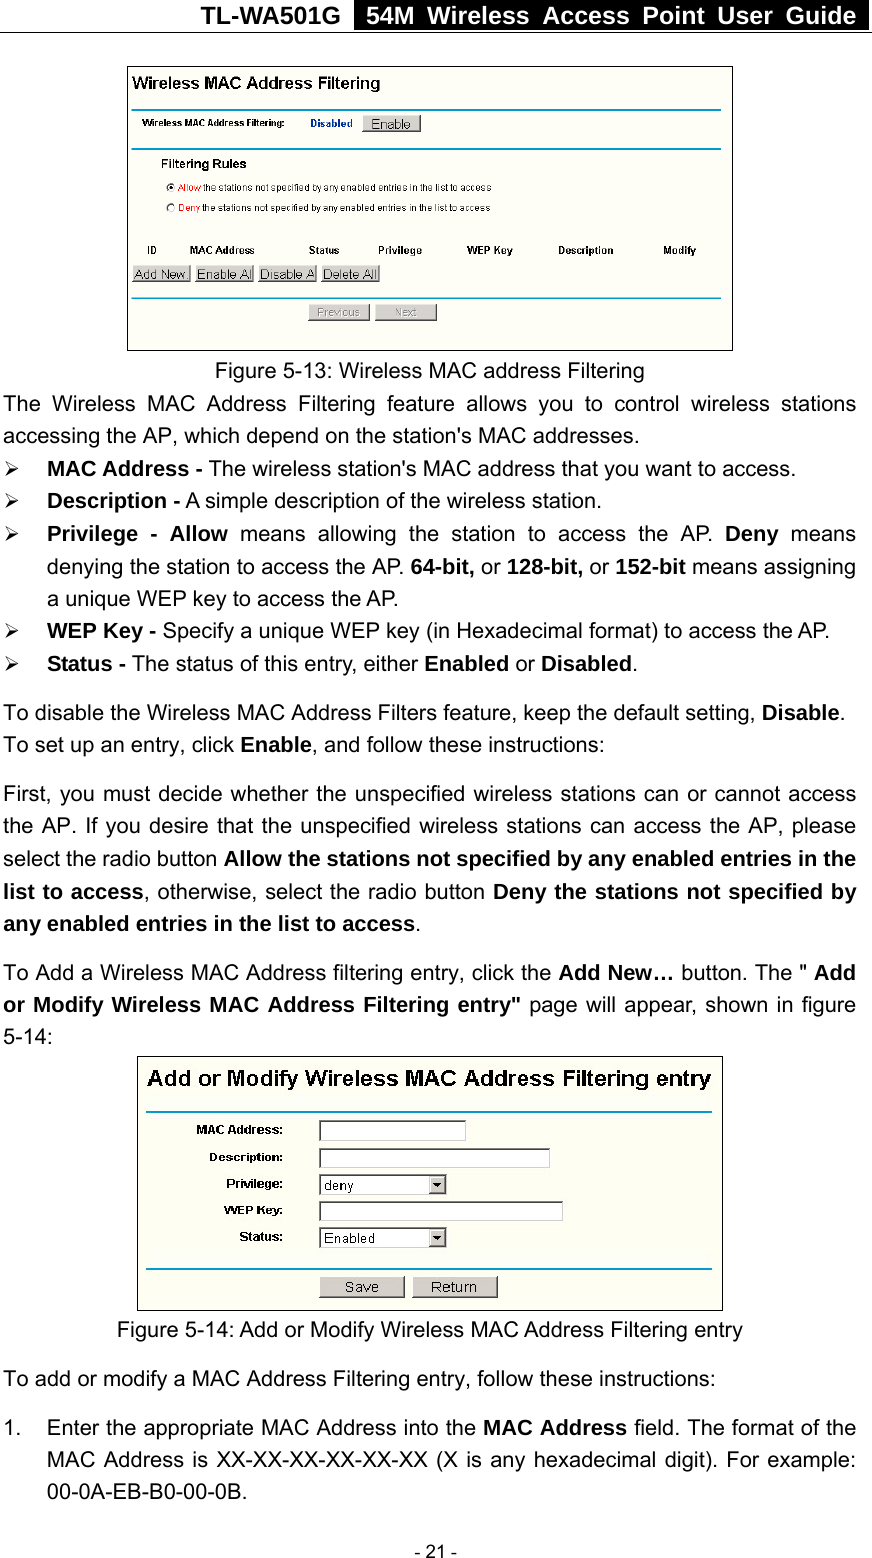 TL-WA501G   54M Wireless Access Point User Guide   Figure 5-13: Wireless MAC address Filtering The Wireless MAC Address Filtering feature allows you to control wireless stations accessing the AP, which depend on the station&apos;s MAC addresses.   ¾ MAC Address - The wireless station&apos;s MAC address that you want to access.   ¾ Description - A simple description of the wireless station.   ¾ Privilege - Allow means allowing the station to access the AP. Deny means denying the station to access the AP. 64-bit, or 128-bit, or 152-bit means assigning a unique WEP key to access the AP.   ¾ WEP Key - Specify a unique WEP key (in Hexadecimal format) to access the AP.   ¾ Status - The status of this entry, either Enabled or Disabled. To disable the Wireless MAC Address Filters feature, keep the default setting, Disable. To set up an entry, click Enable, and follow these instructions:   First, you must decide whether the unspecified wireless stations can or cannot access the AP. If you desire that the unspecified wireless stations can access the AP, please select the radio button Allow the stations not specified by any enabled entries in the list to access, otherwise, select the radio button Deny the stations not specified by any enabled entries in the list to access. To Add a Wireless MAC Address filtering entry, click the Add New… button. The &quot; Add or Modify Wireless MAC Address Filtering entry&quot; page will appear, shown in figure 5-14:  Figure 5-14: Add or Modify Wireless MAC Address Filtering entry To add or modify a MAC Address Filtering entry, follow these instructions: 1.  Enter the appropriate MAC Address into the MAC Address field. The format of the MAC Address is XX-XX-XX-XX-XX-XX (X is any hexadecimal digit). For example: 00-0A-EB-B0-00-0B.   - 21 - 